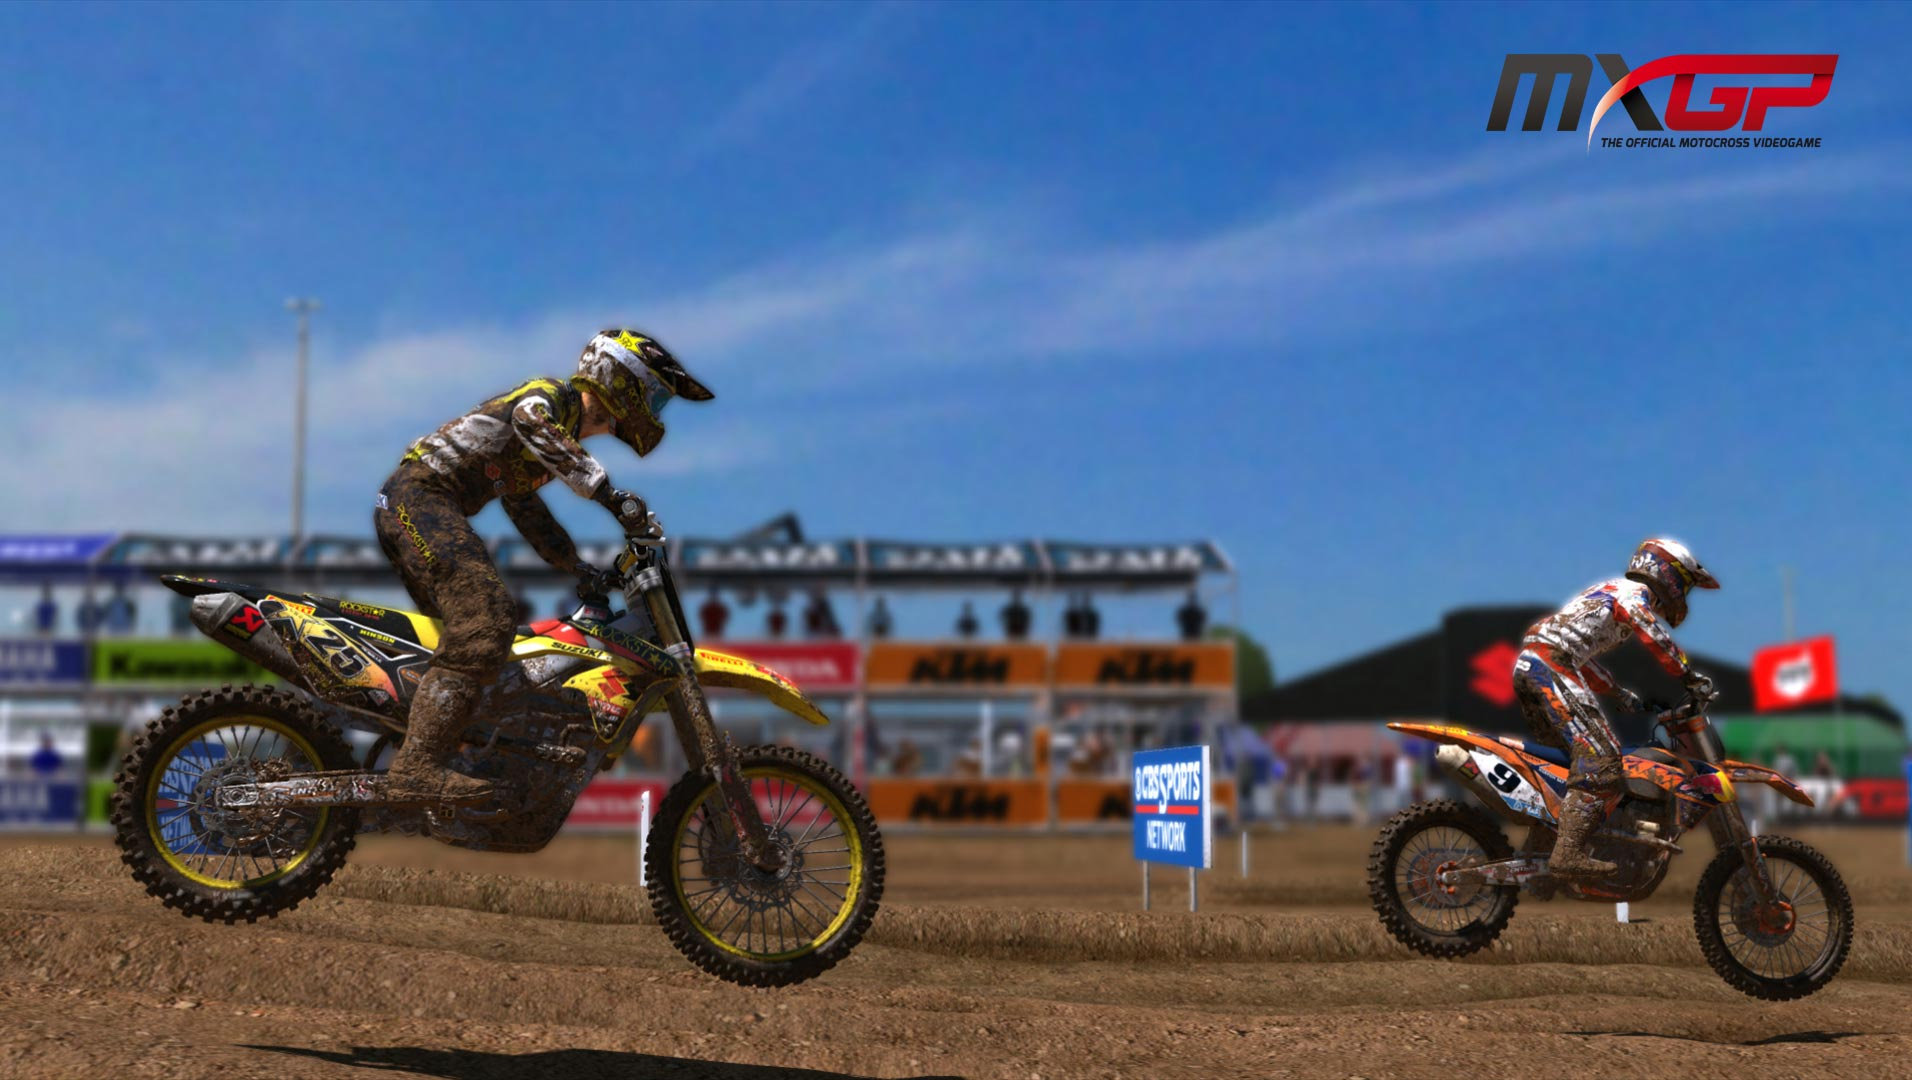 MXGP: THE OFFICIAL MOTOCROSS VIDEOGAME - GAMEPLAY (PS3 / XBOX 360) 